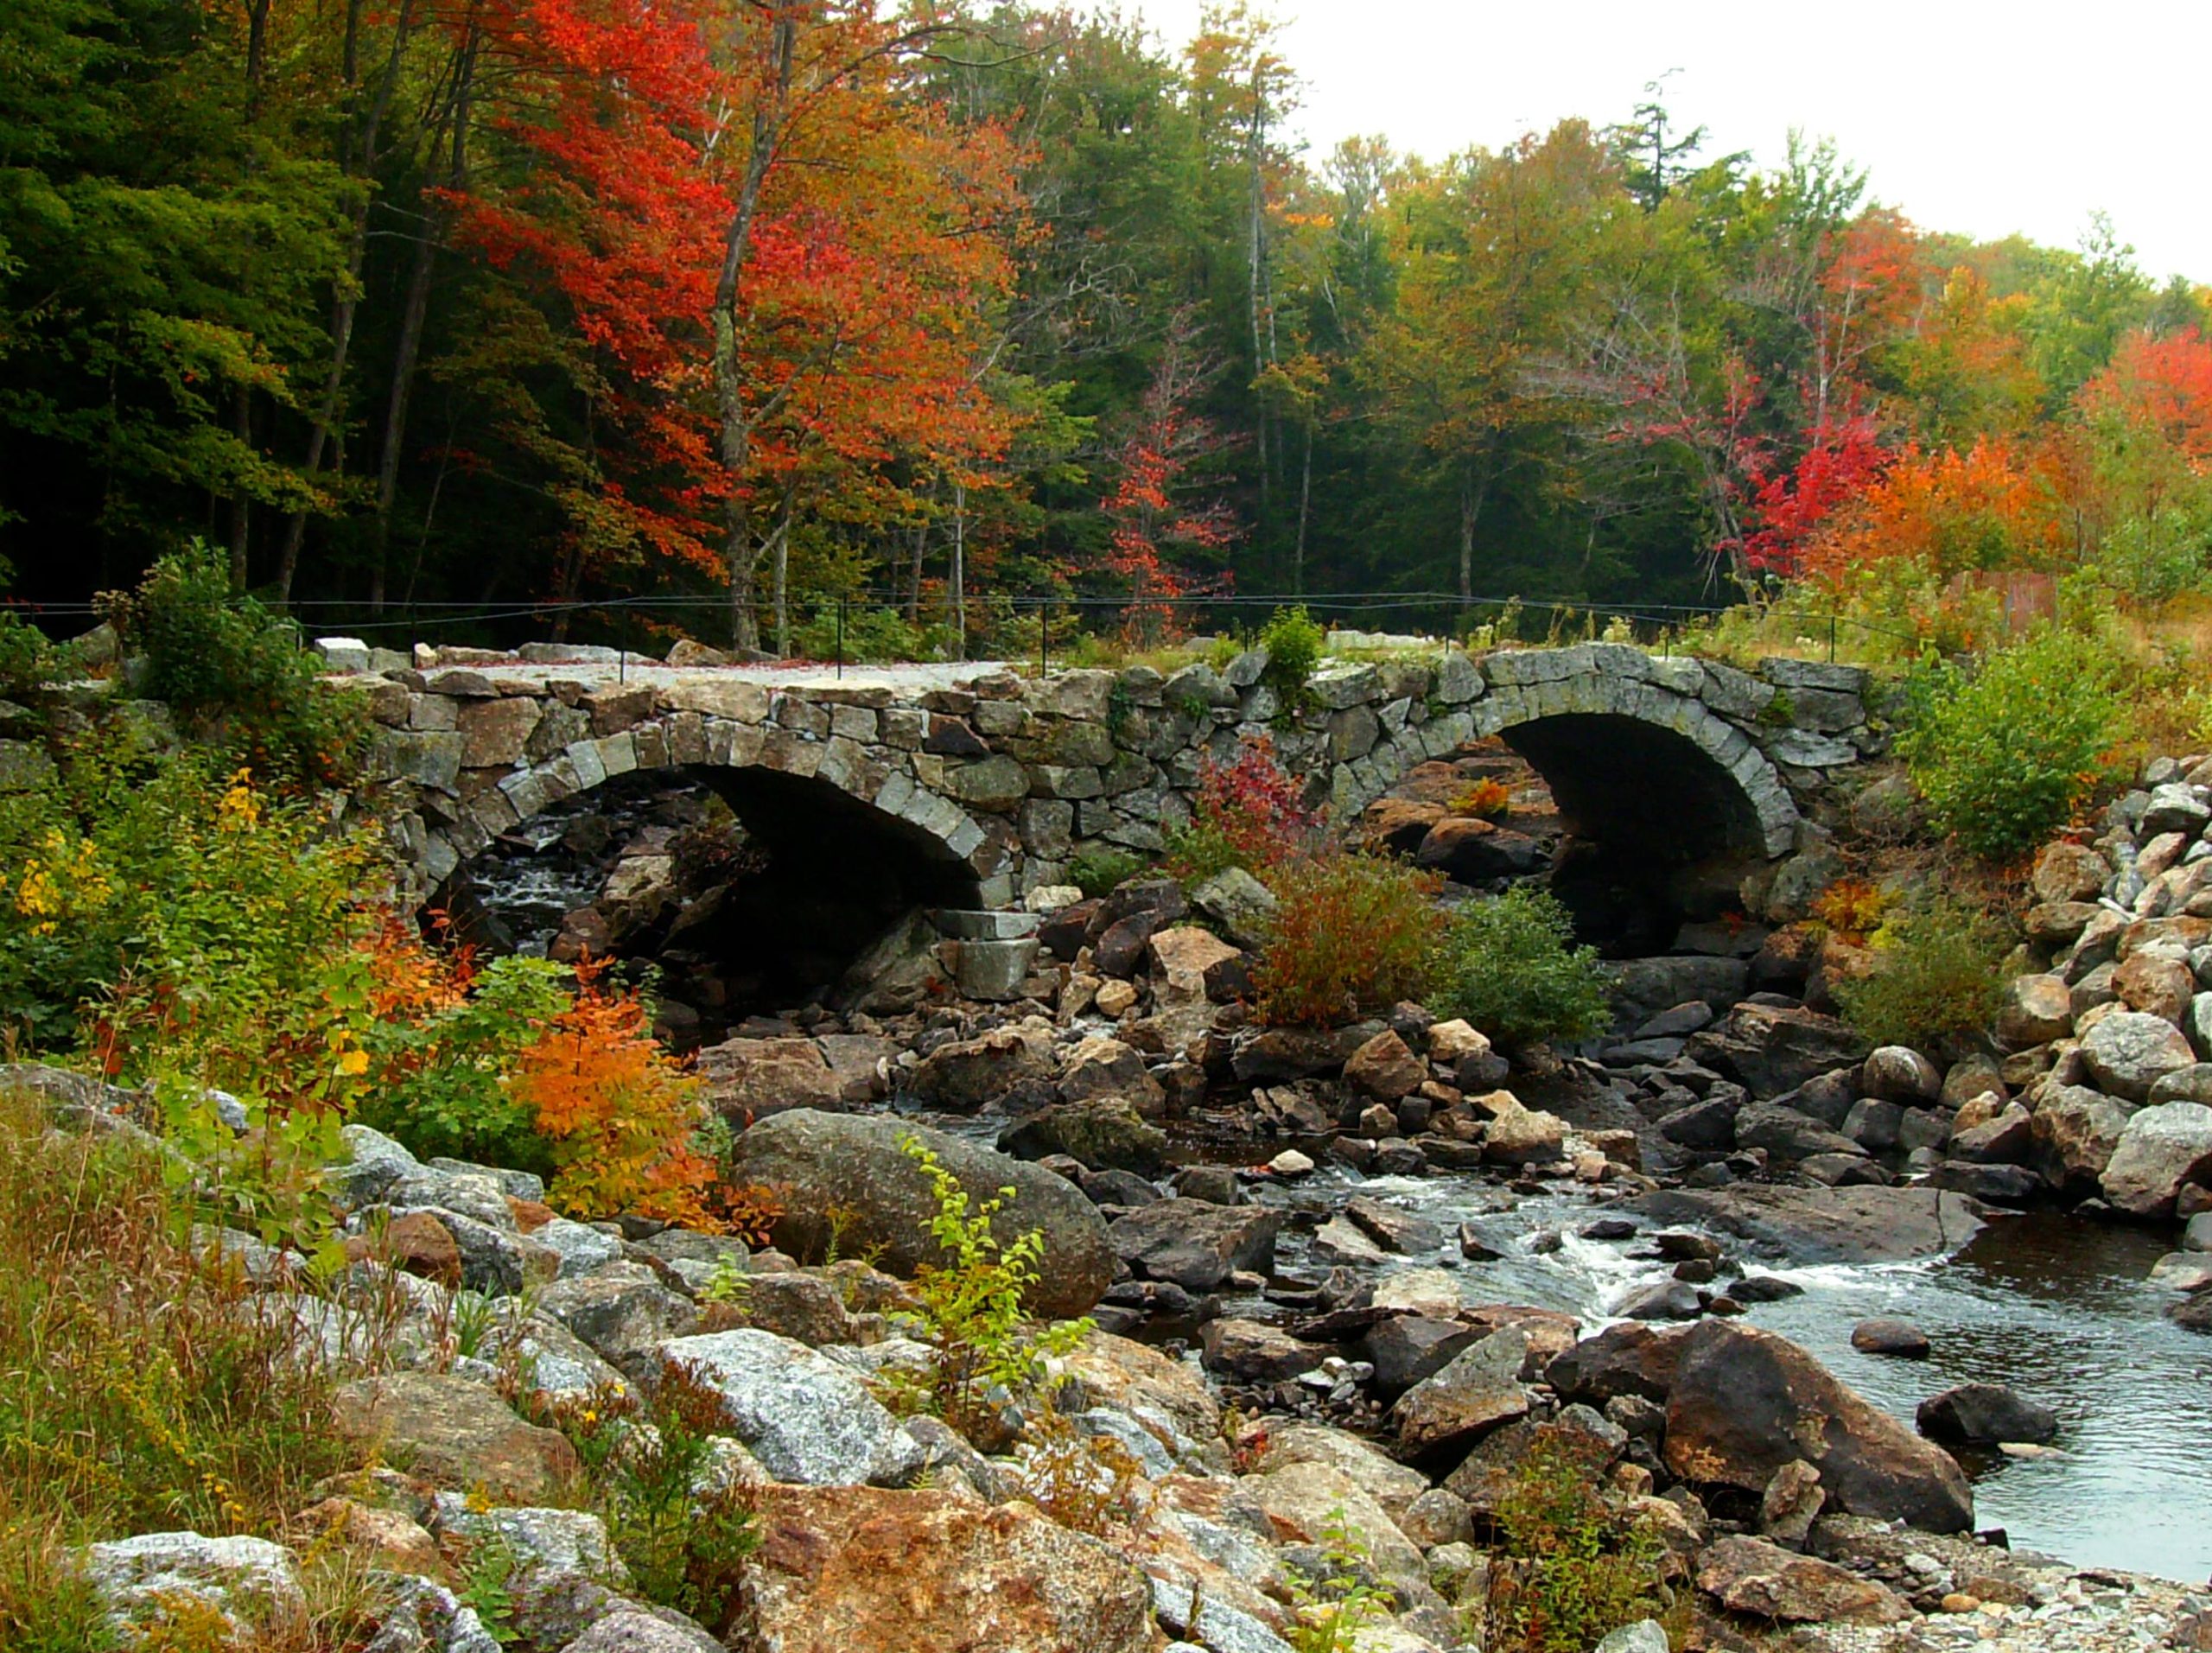 Stone Bridge In Fall (user submitted)